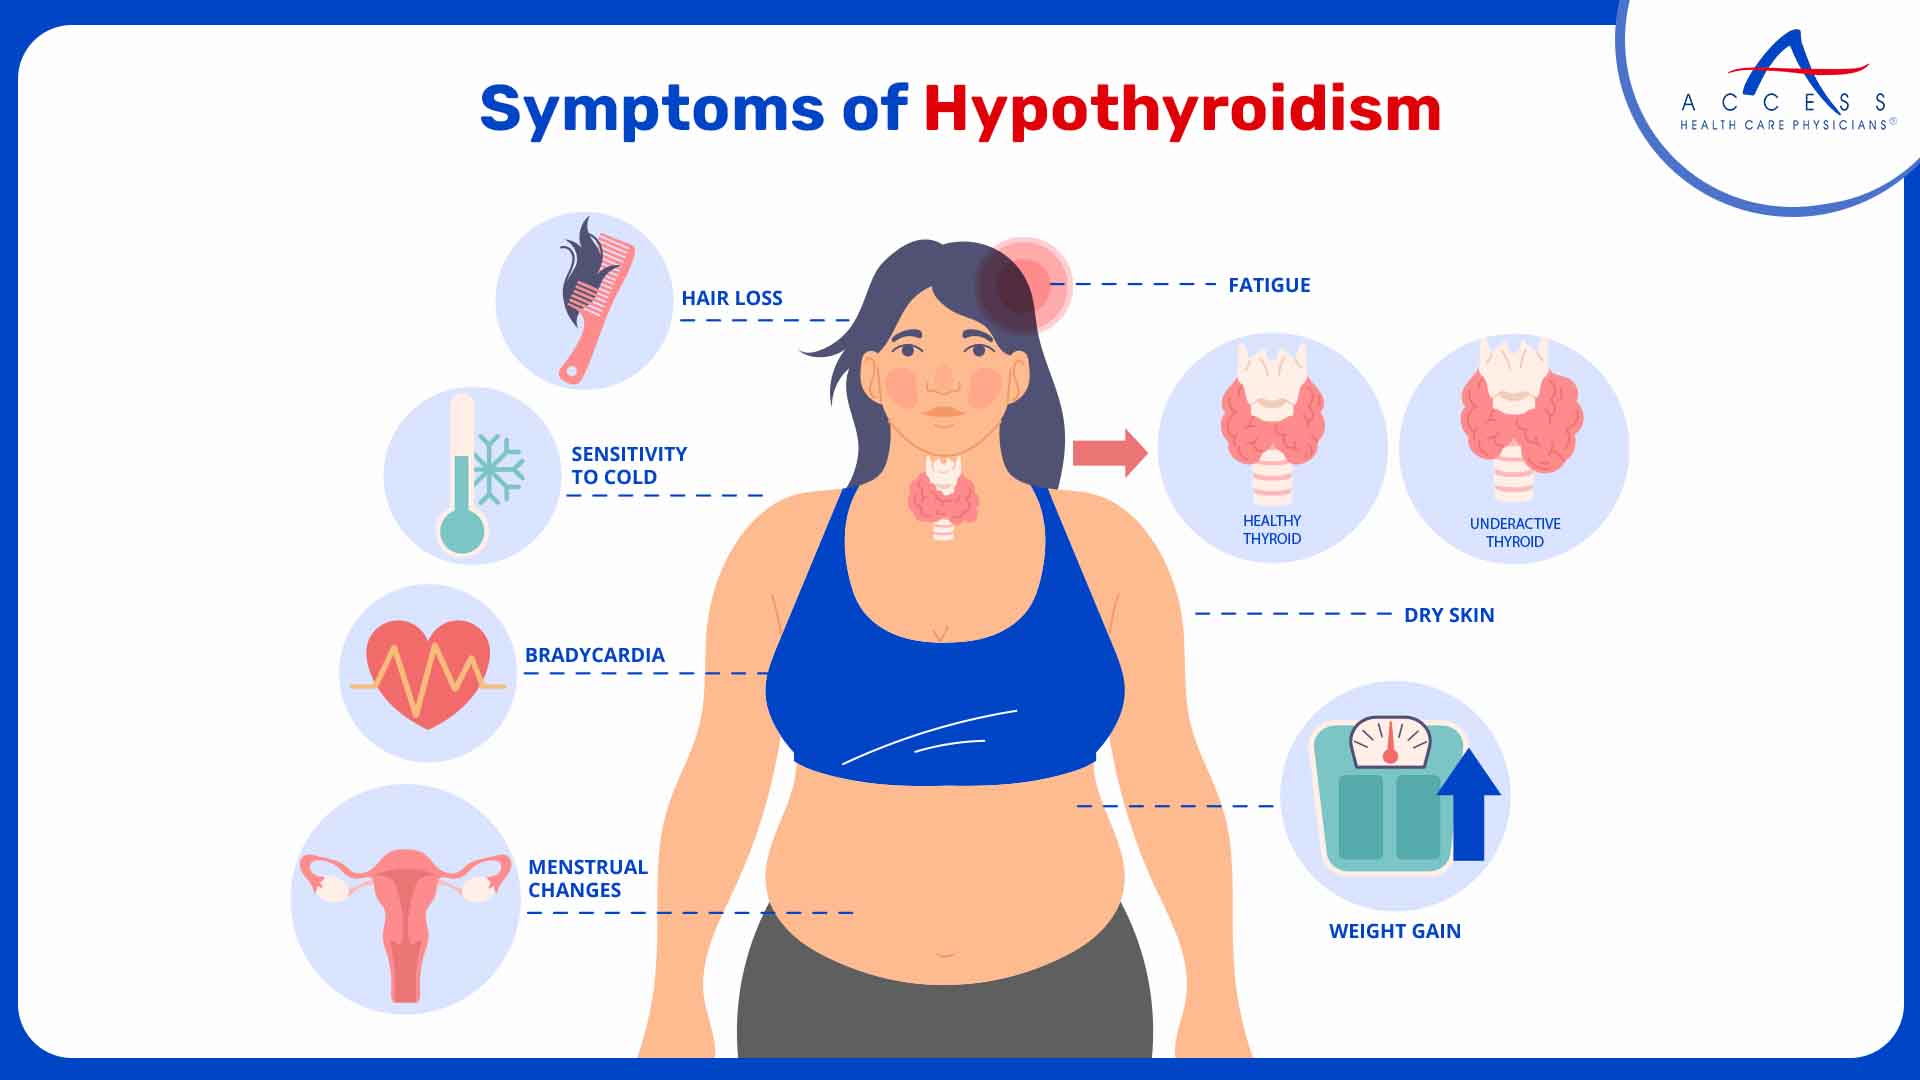 On the other hand, the symptoms of hypothyroidism can be subtle. Common symptoms include: